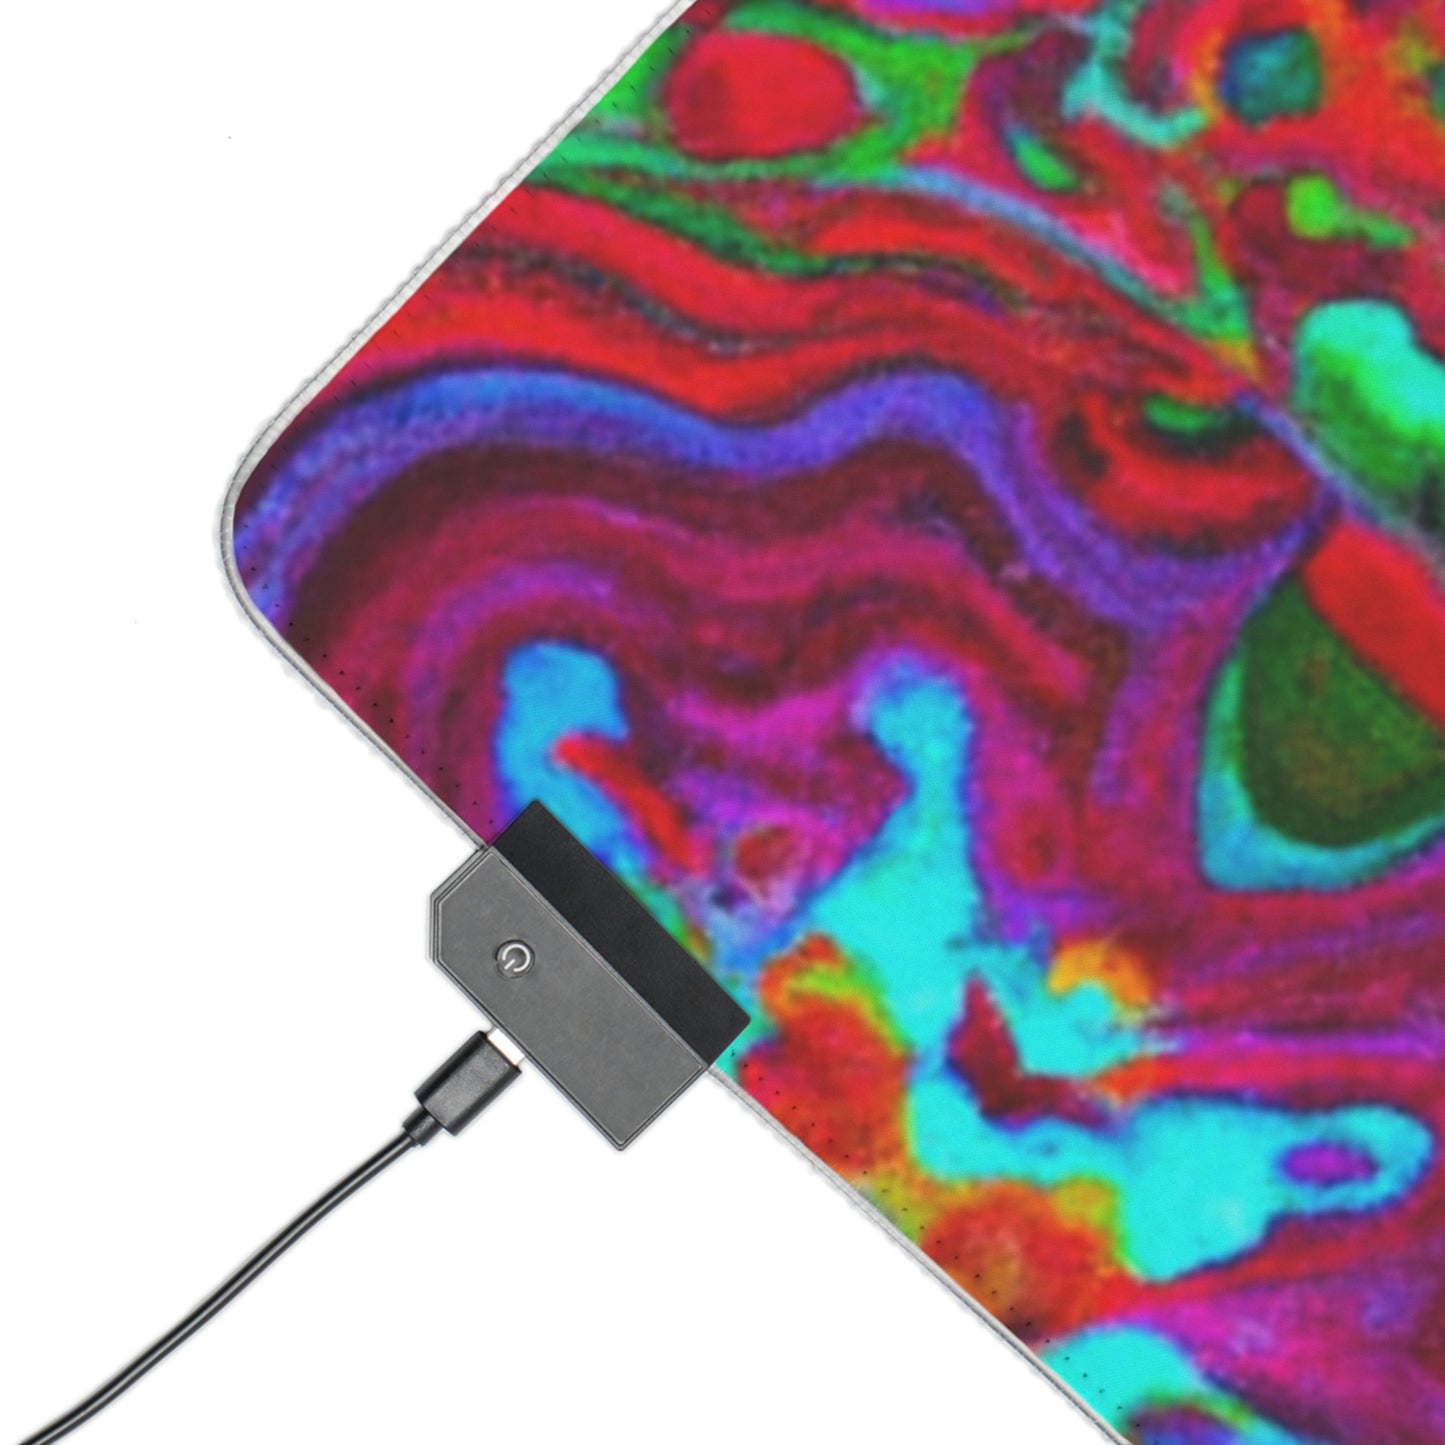 Rocko "Rage" Richards - Psychedelic Trippy LED Light Up Gaming Mouse Pad